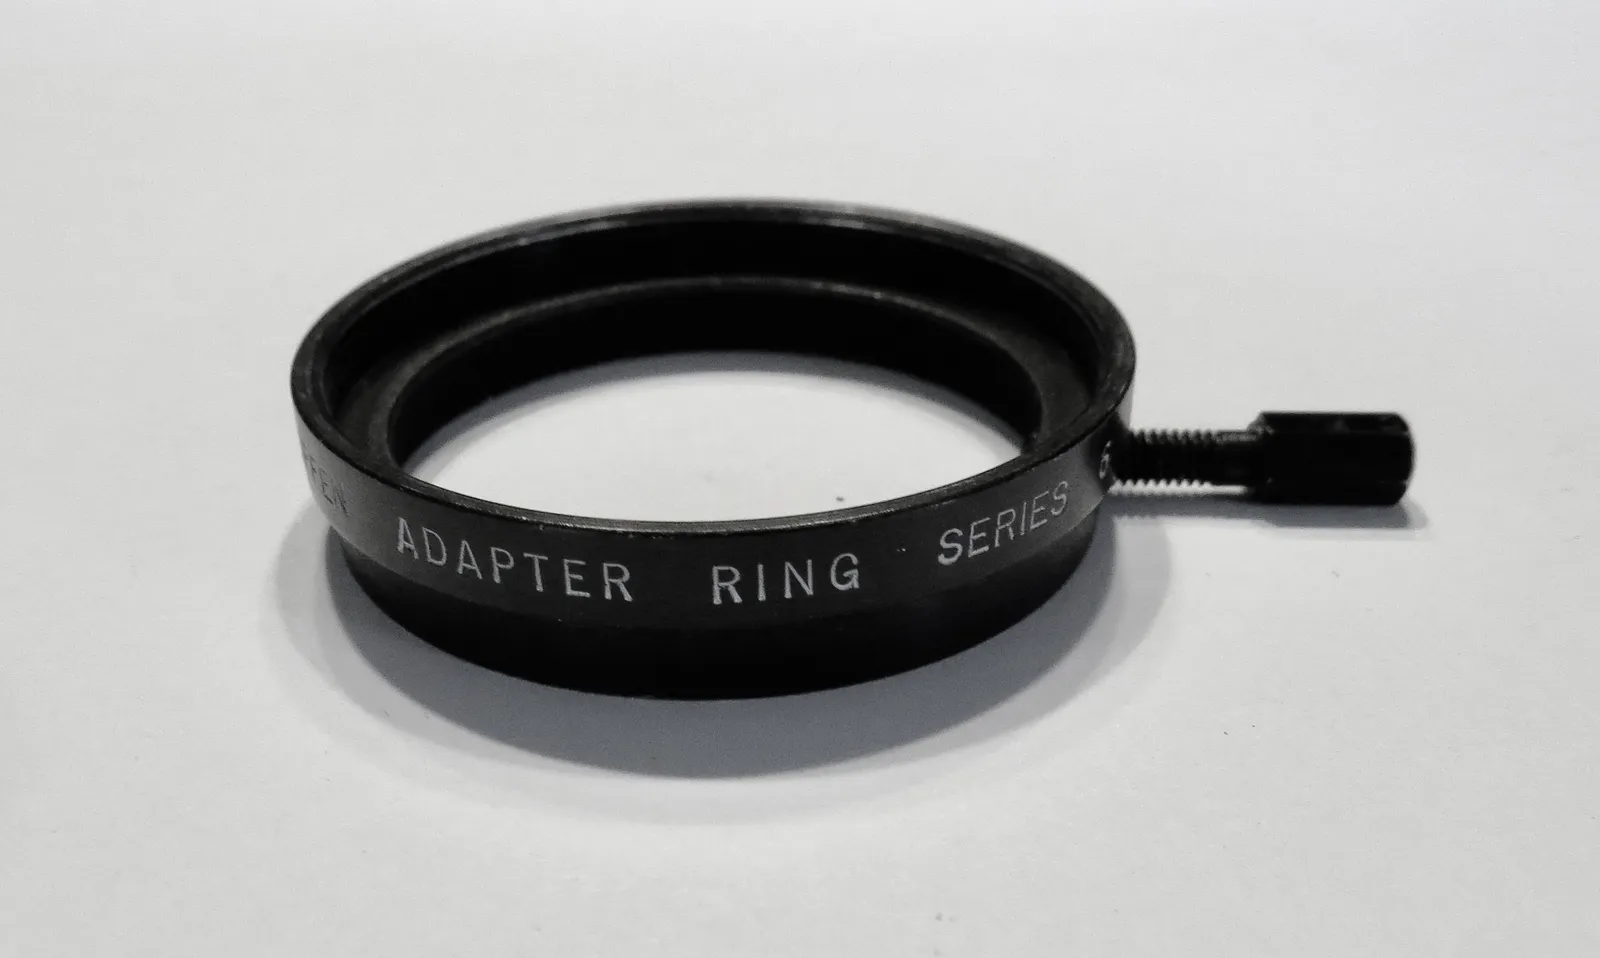 Vintage Black Metal Filter Adapter - Series 6 - Clamp-On - In Good Condition